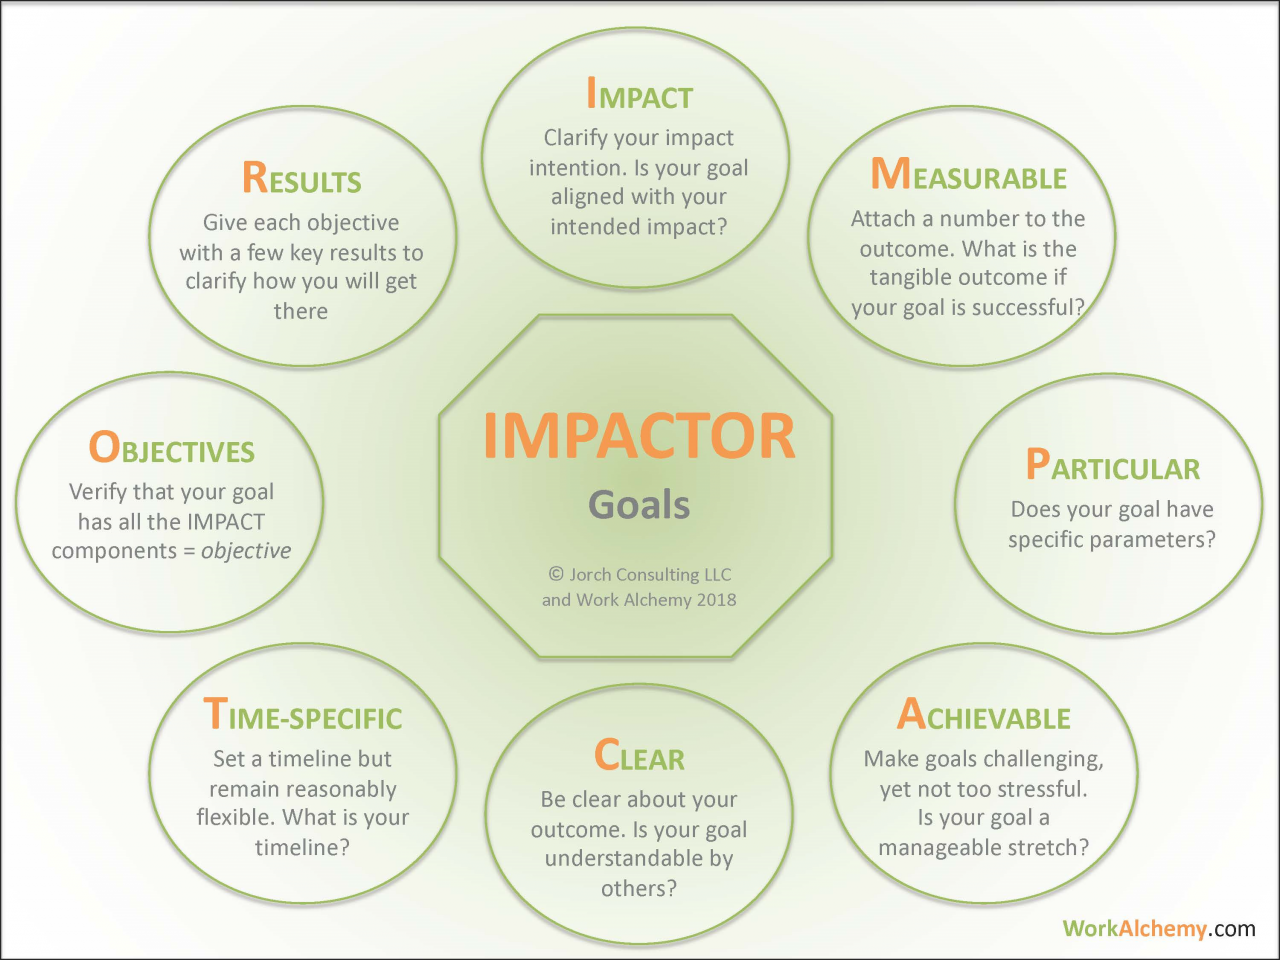 How to make an impact on your job